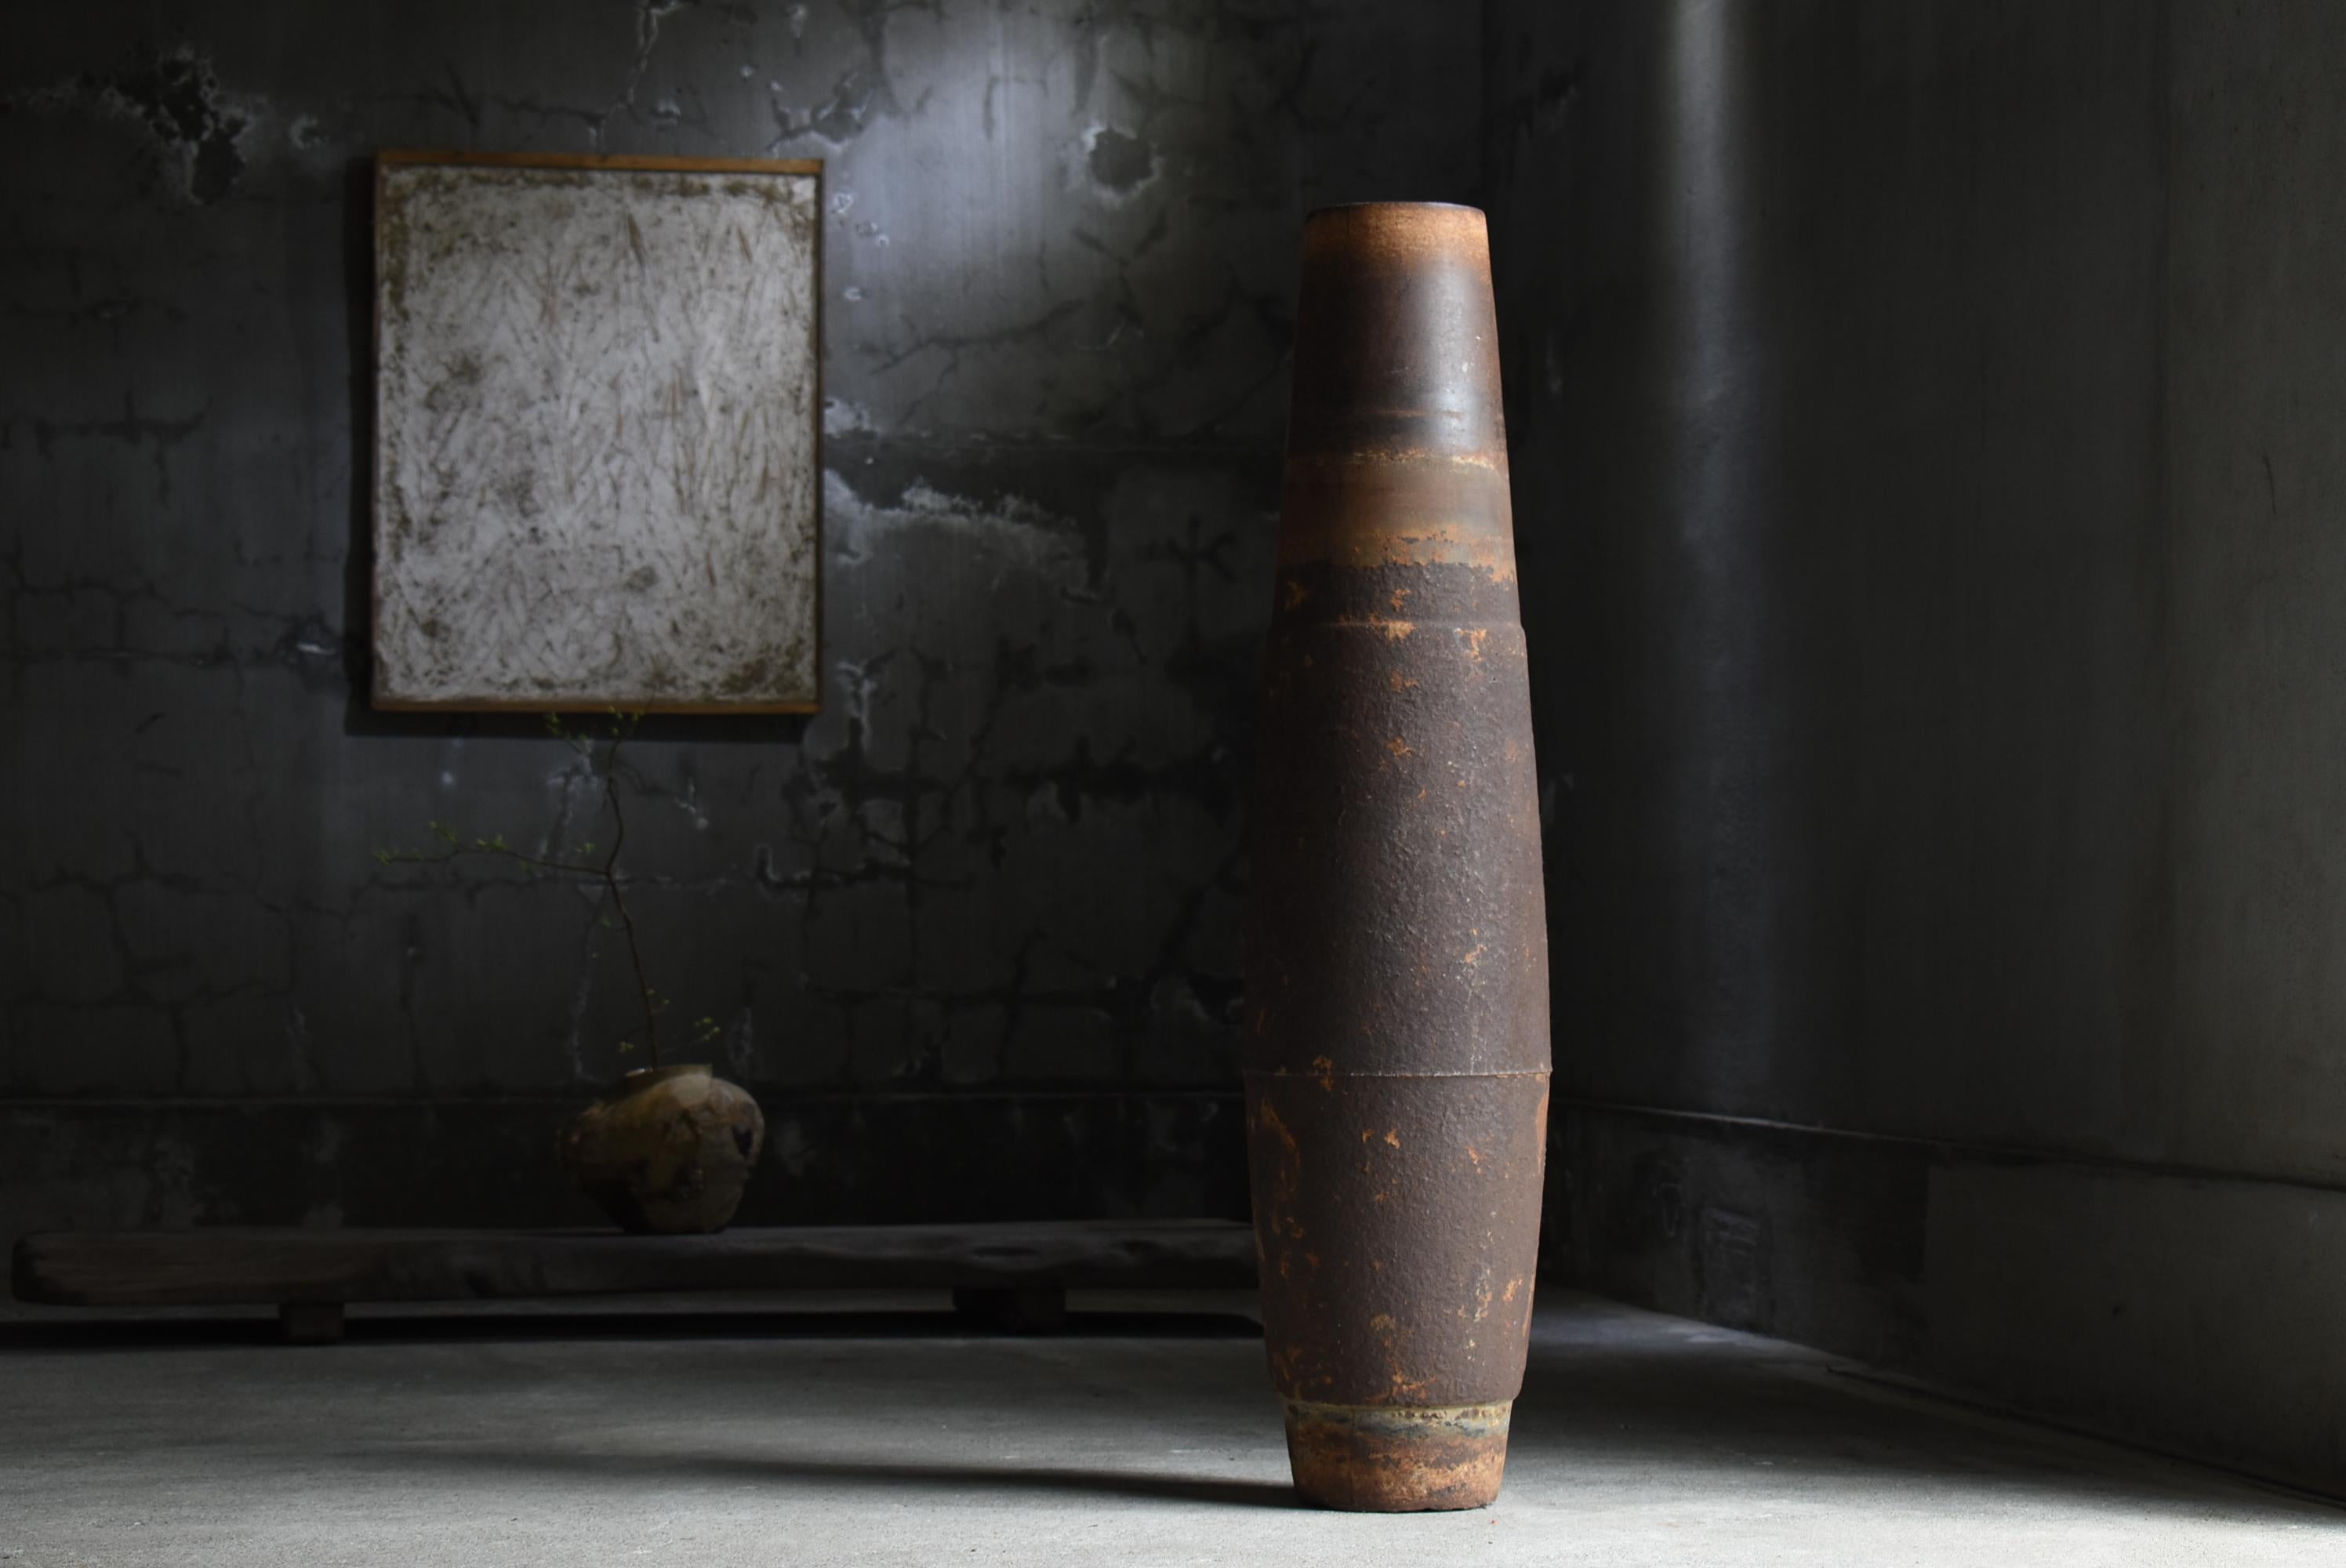 Very old Japanese iron cylinder.
It is thought to be a fuel tank, but details are unknown.
The period is thought to be 1900s-1940s.

The rusty texture is very beautiful.
It has an overwhelming presence as an object of art.

A very rare item